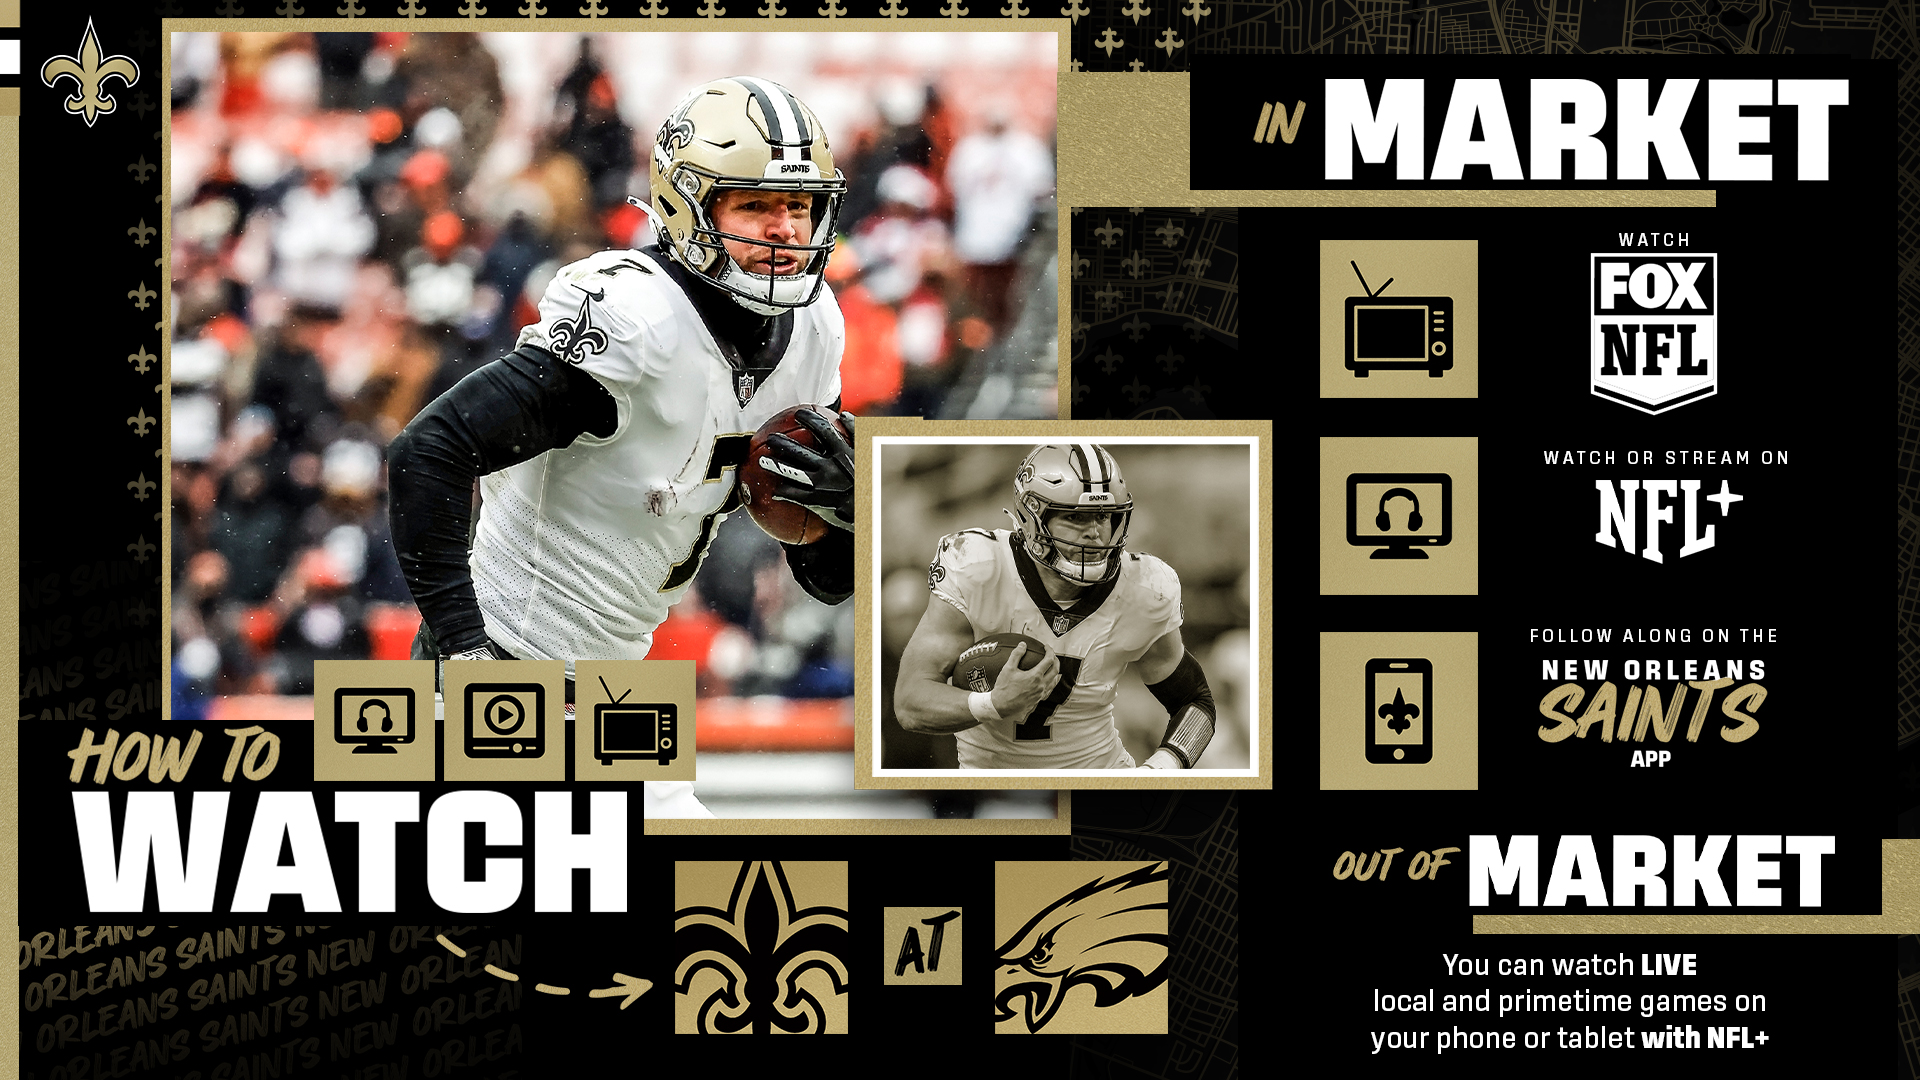 where to watch the saints game